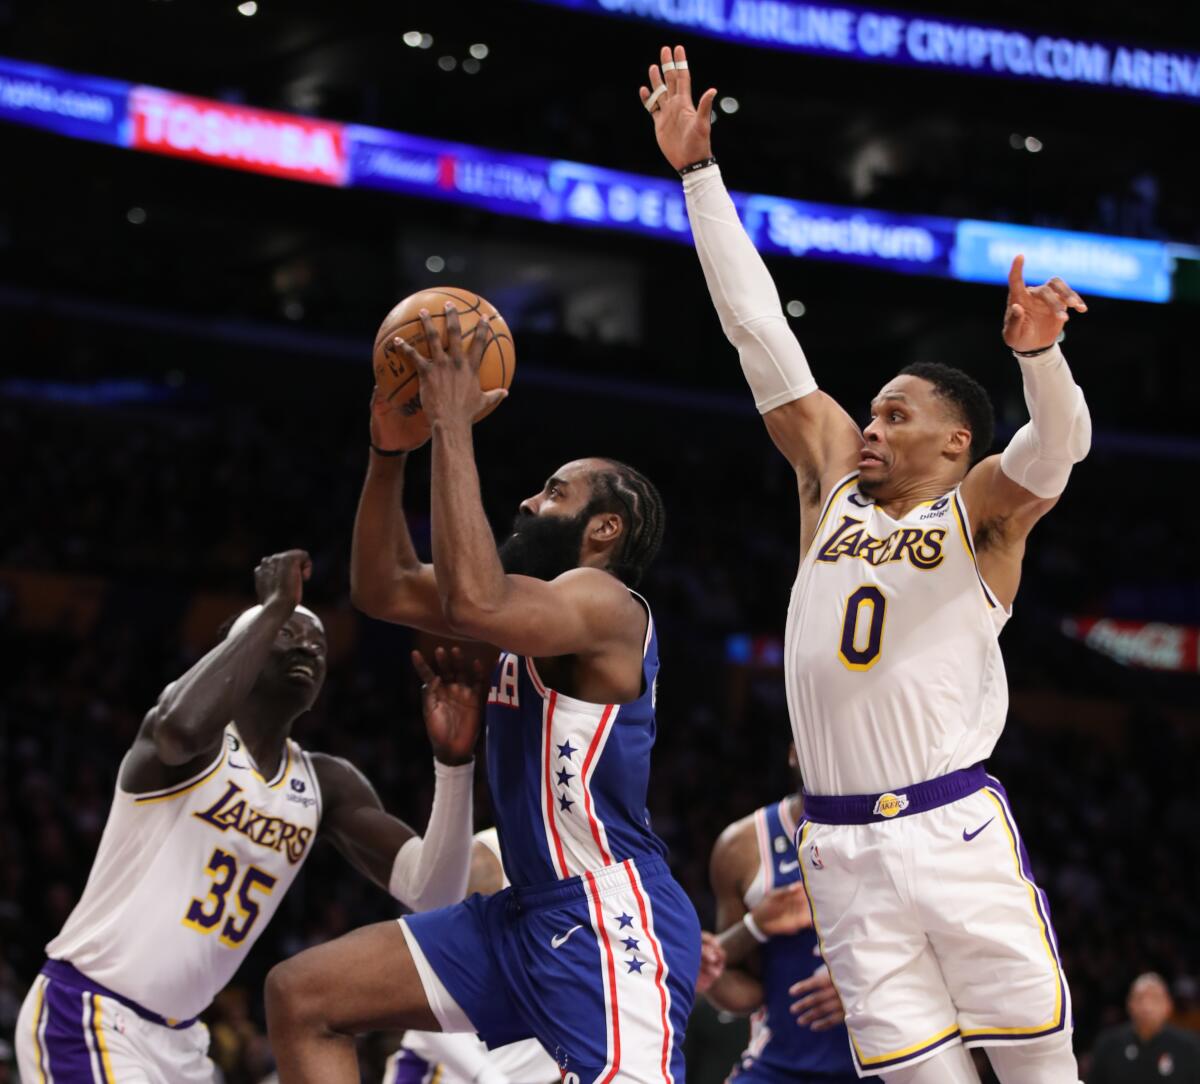 Philadelphia guard James Harden, center, tries to score against the Lakers' Wenyen Gabriel, left, and Russell Westbrook.